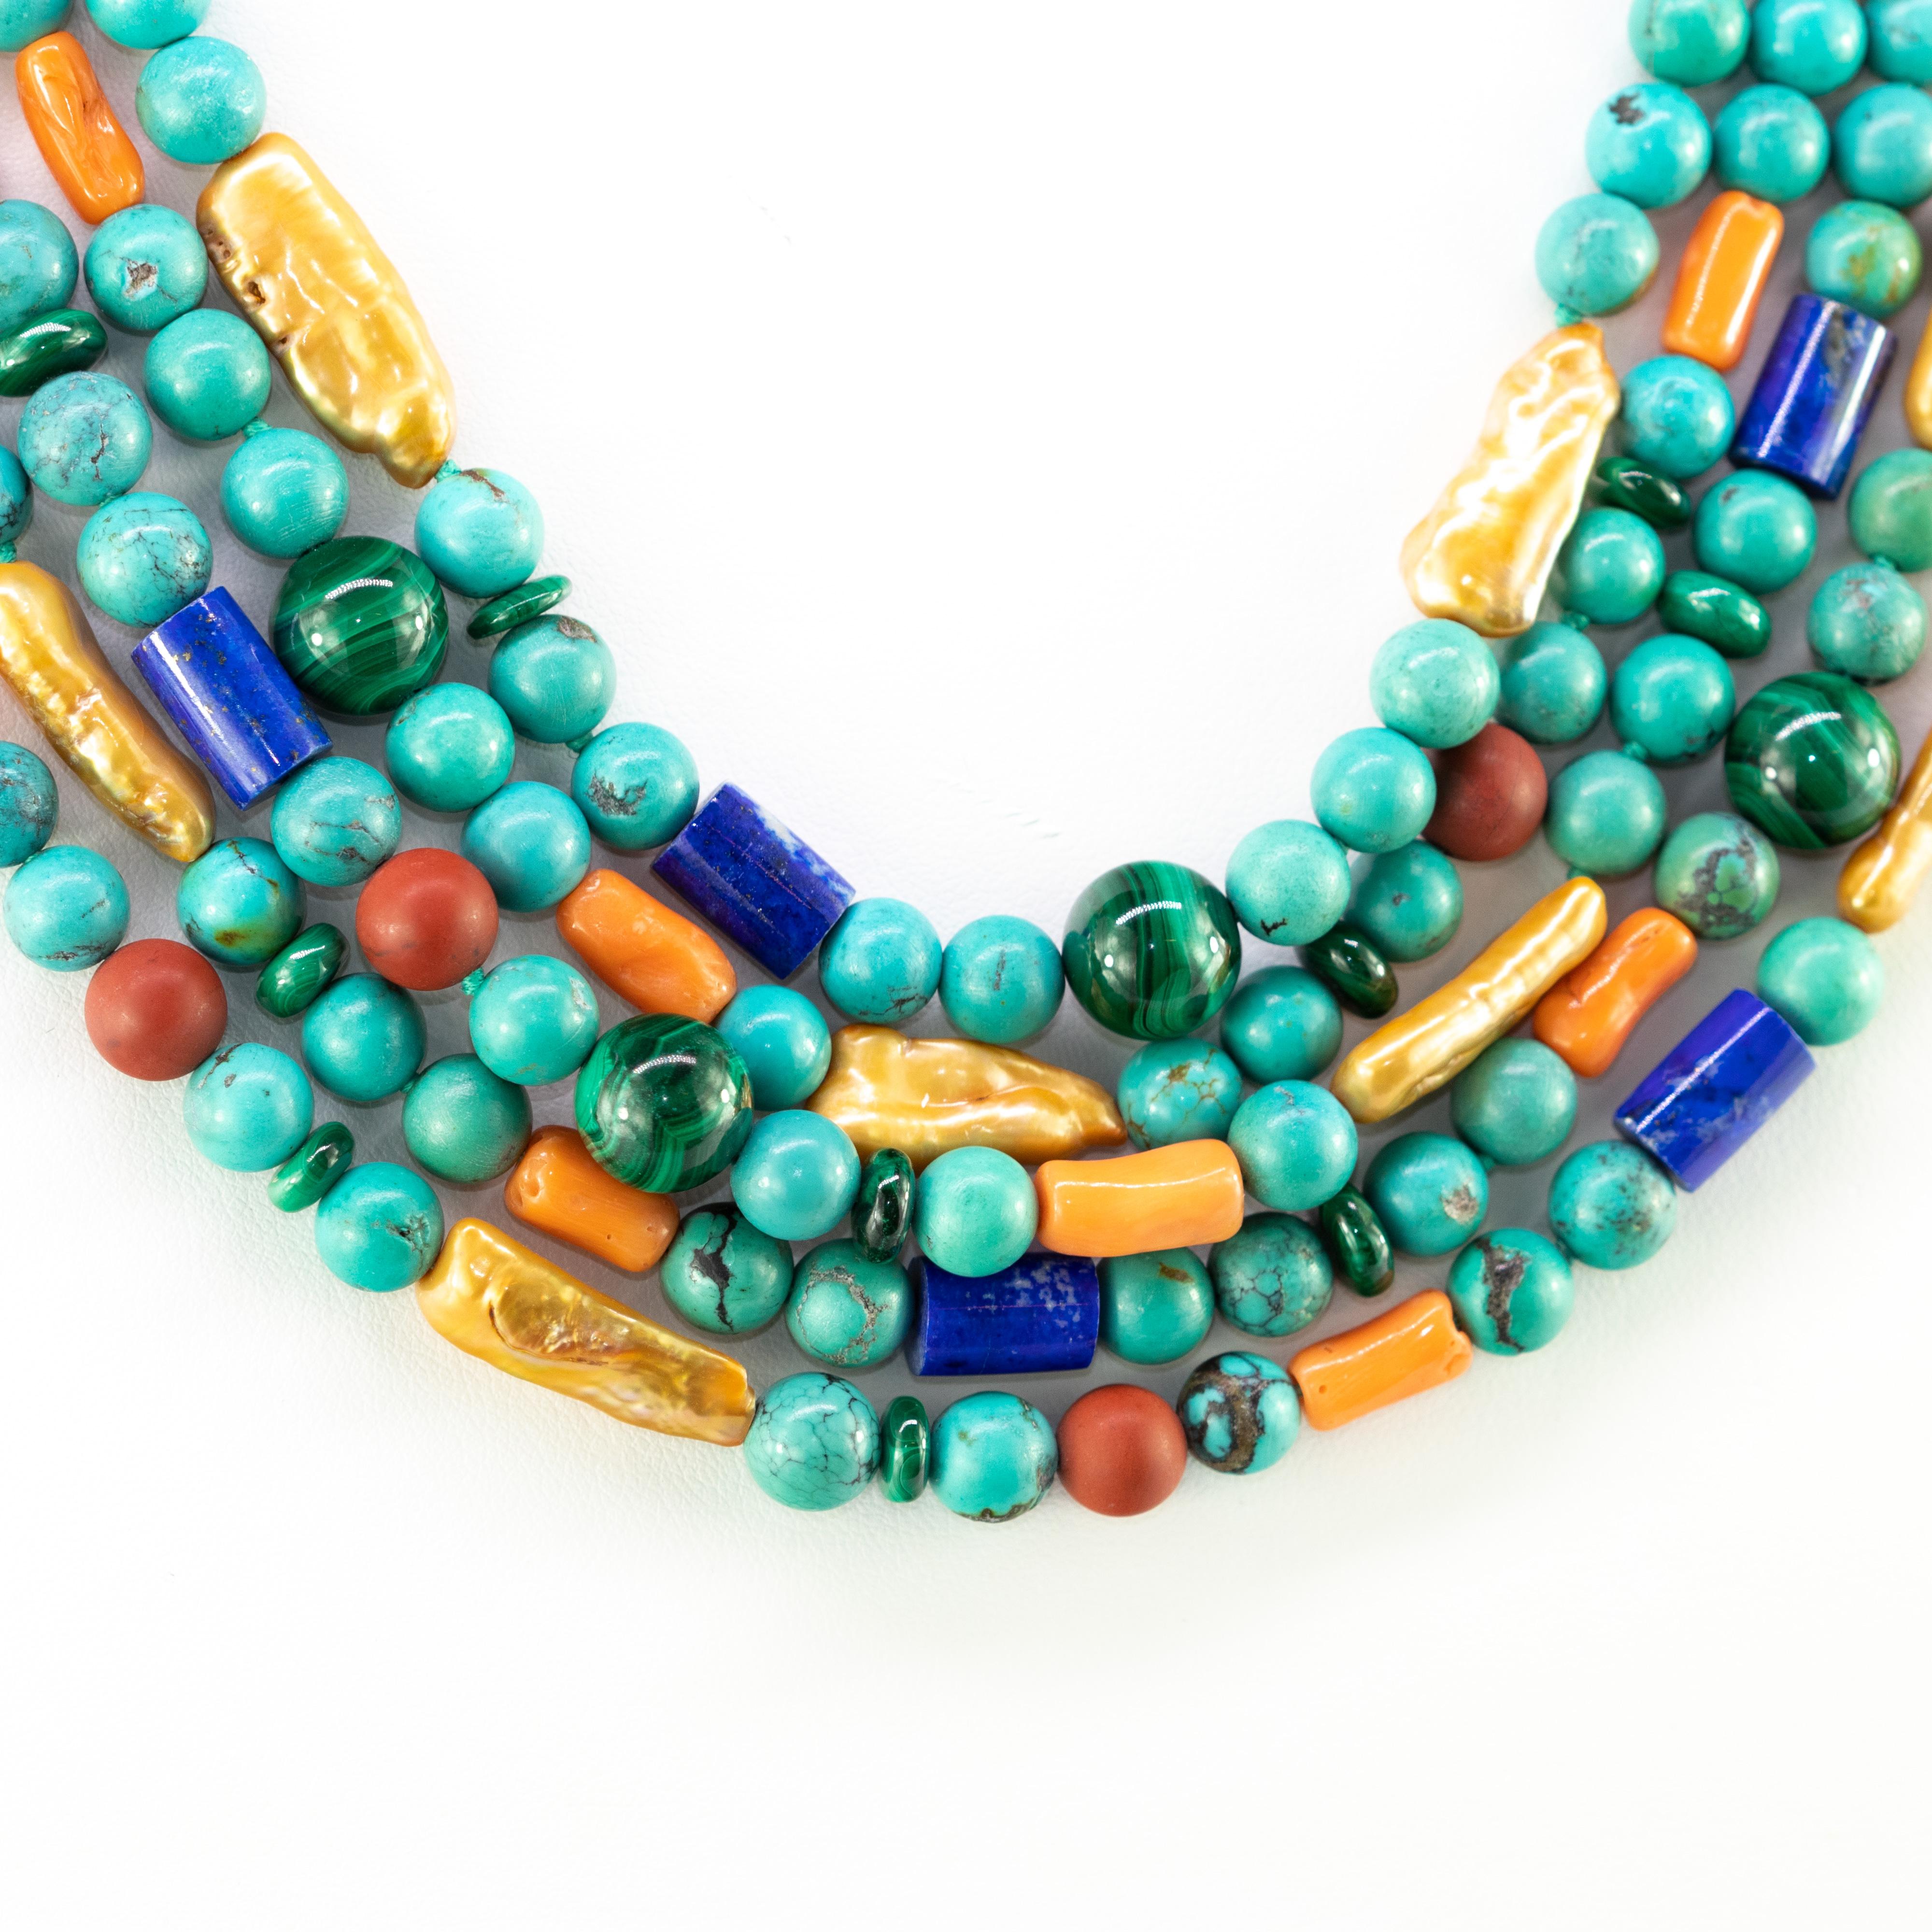 Mixed Cut Turquoise Lapis Lazuli Pearl Coral Malachite Carnelian Beaded Crafted Necklace For Sale